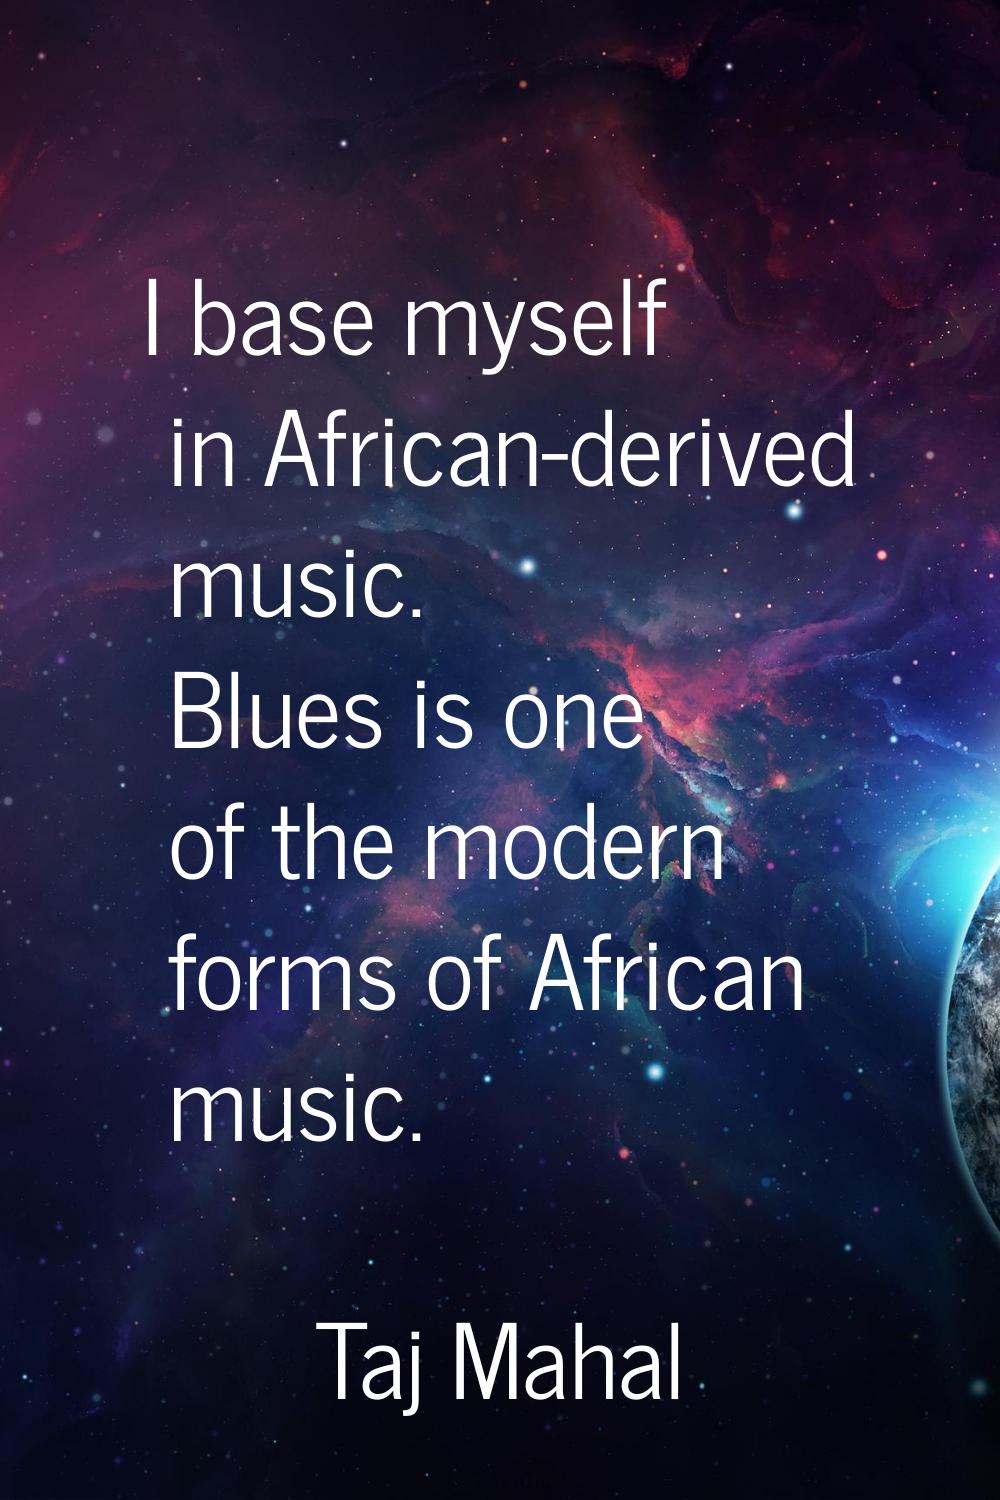 I base myself in African-derived music. Blues is one of the modern forms of African music.